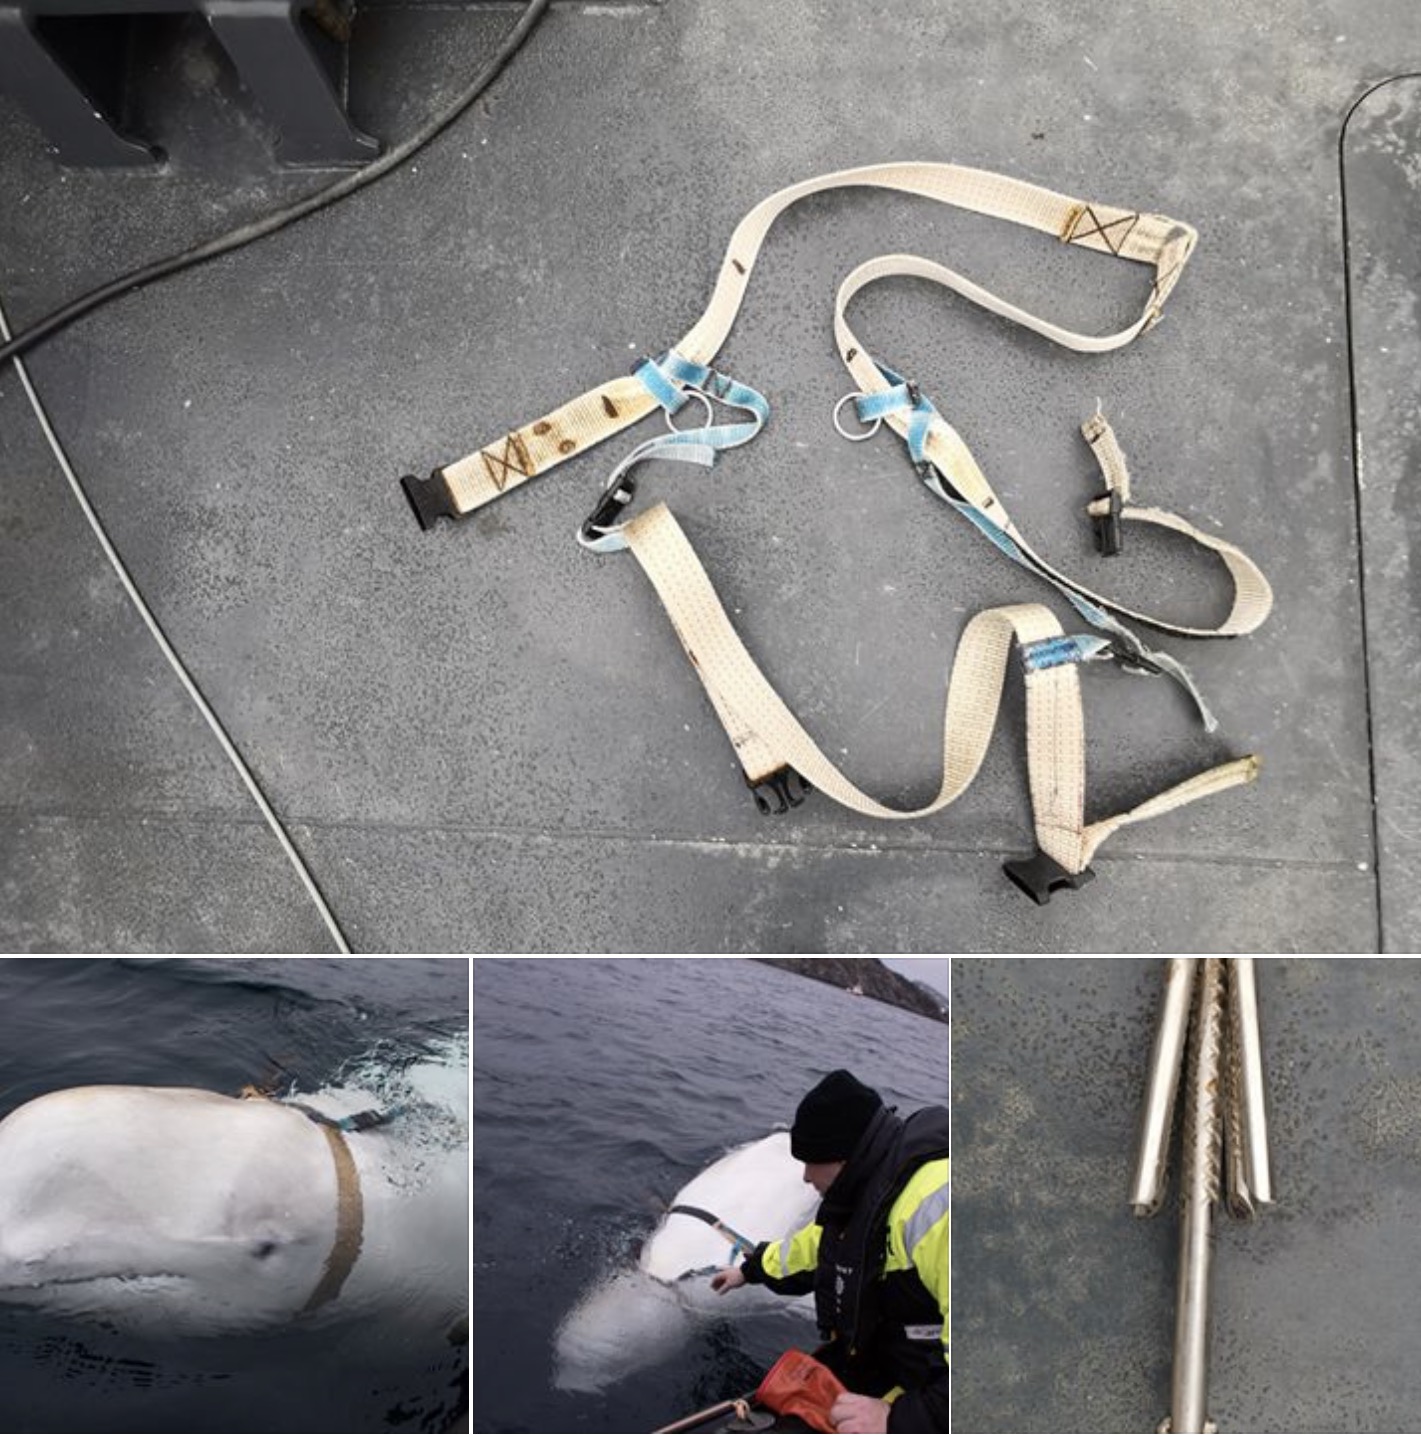 The harness, which was removed, featured a mount for a camera and read “Equipment St. Petersburg,” Joergen Ree Wiig of the Norwegian Directorate of Fisheries told The Associated Press. “People in Norway’s military have shown great interest” in the harness, Ree Wiig said.